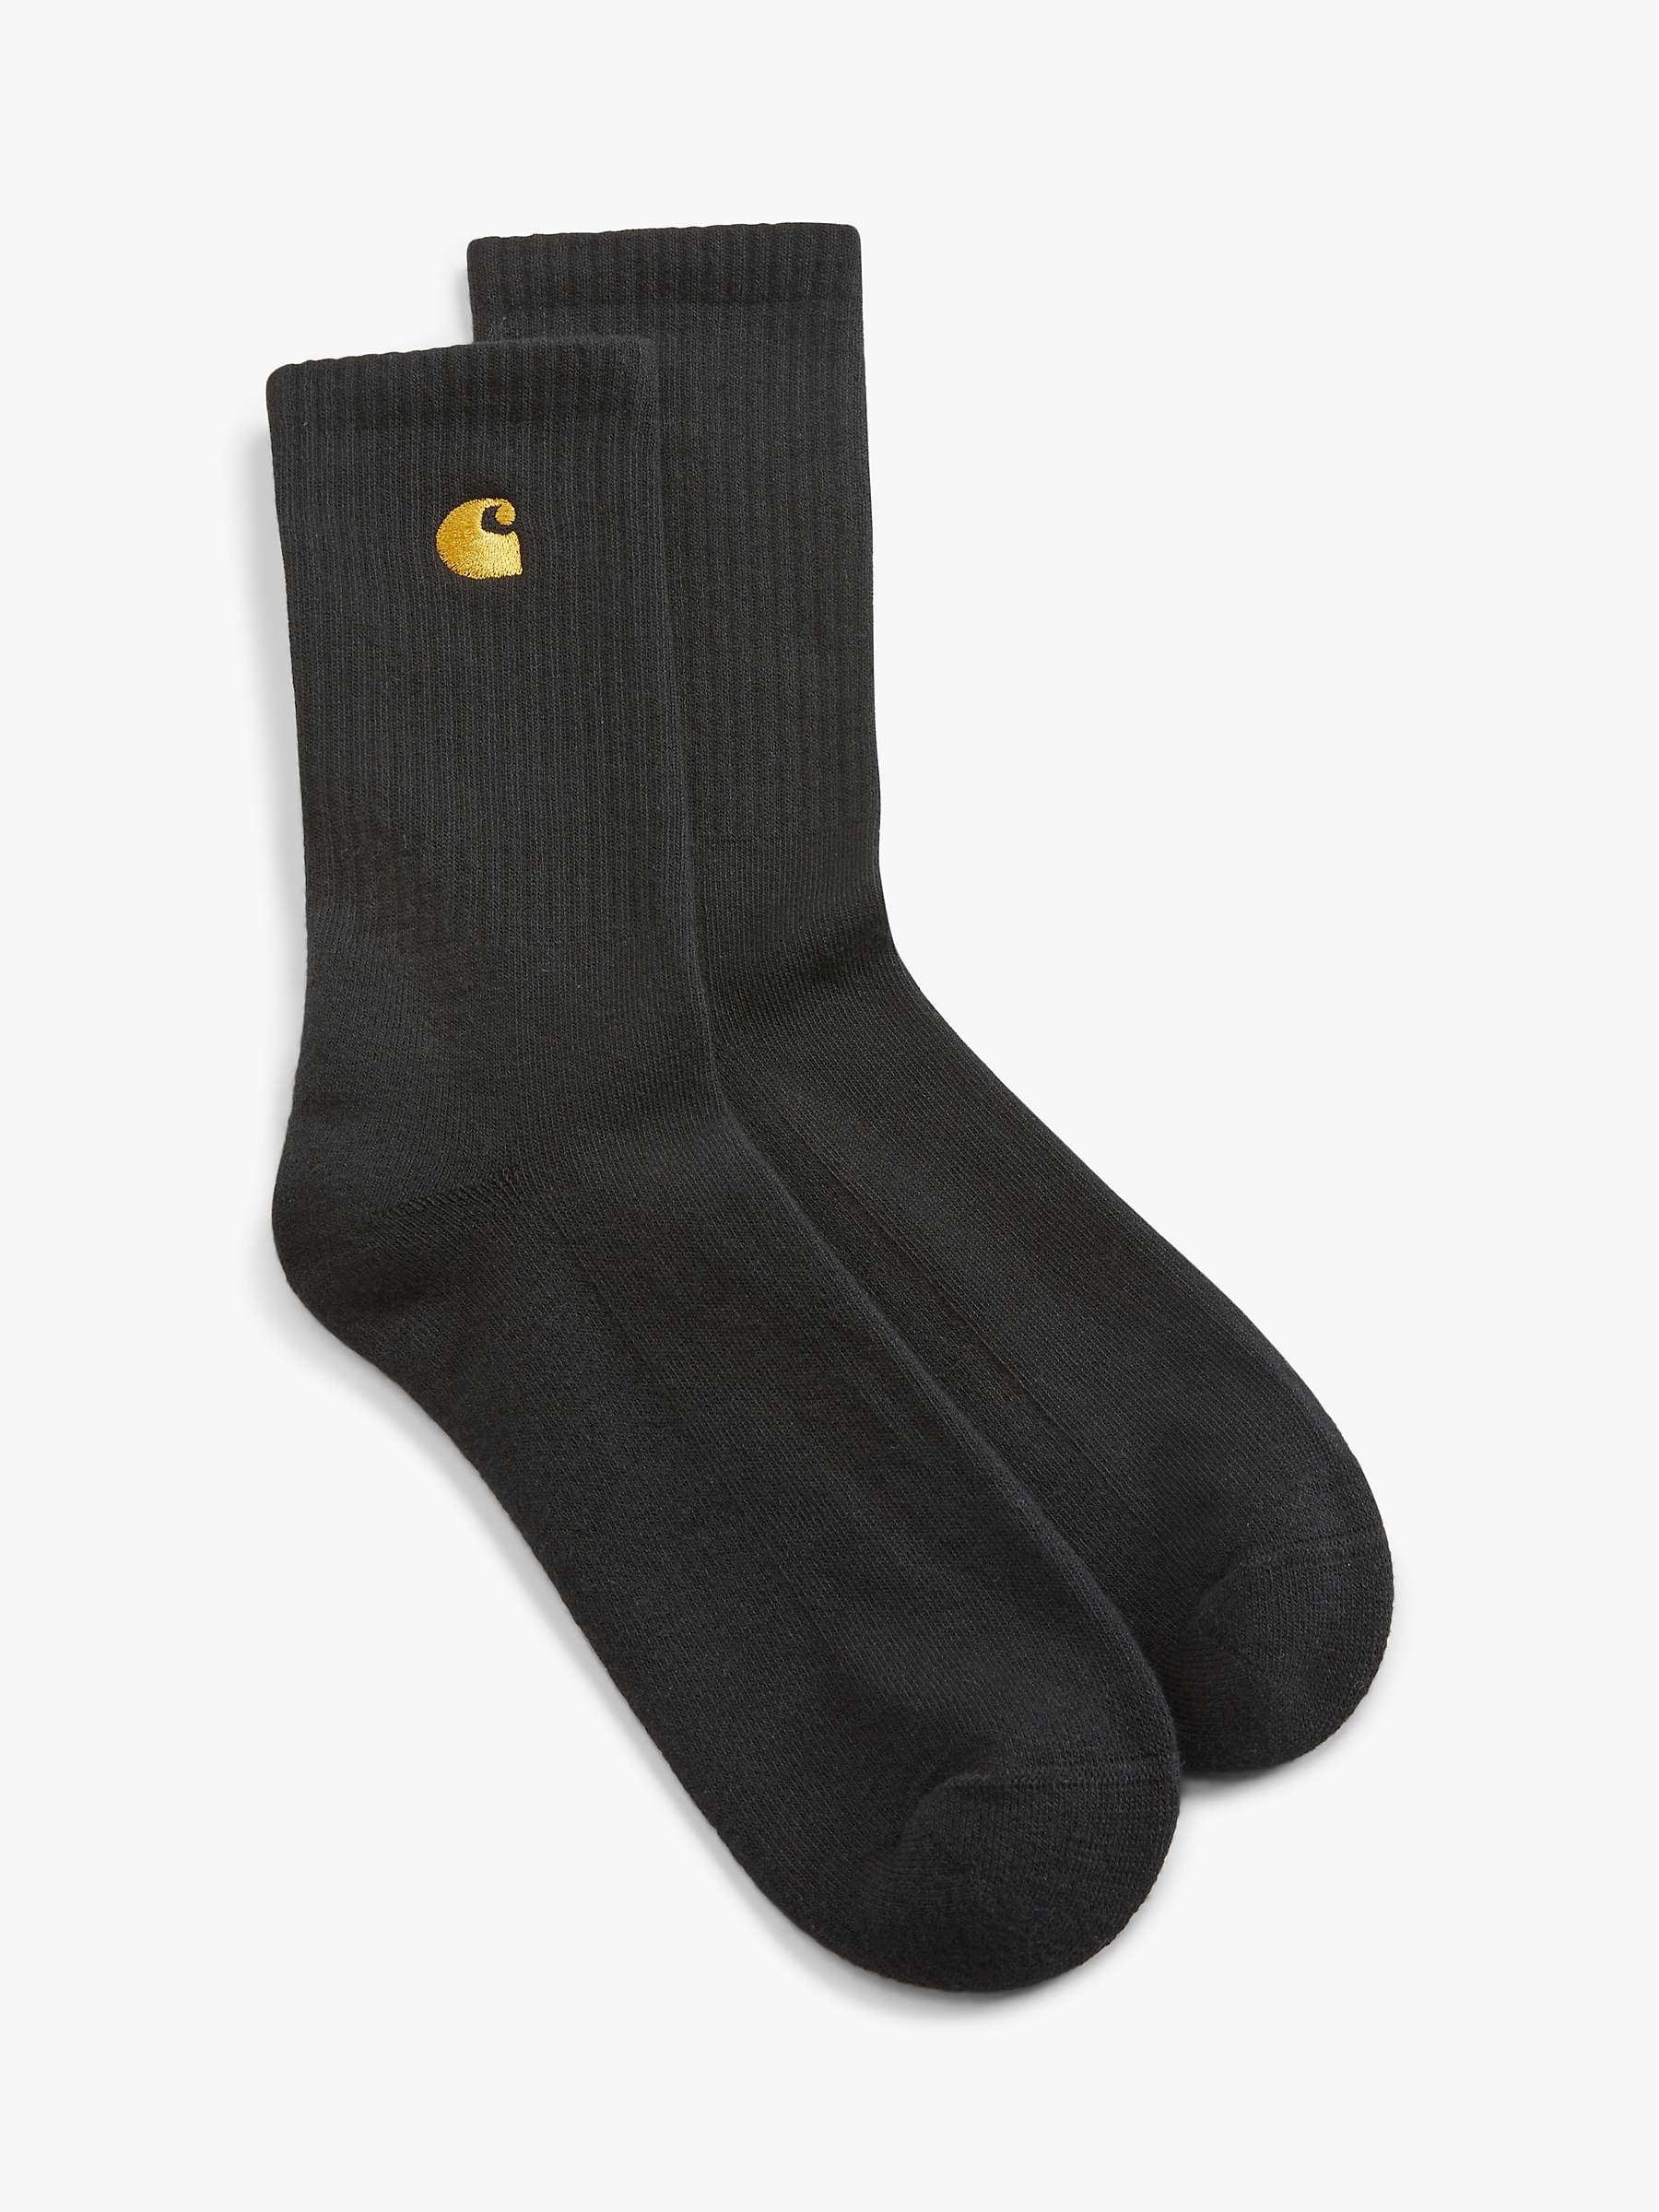 Buy Carhartt WIP Chase Socks, One Size Online at johnlewis.com